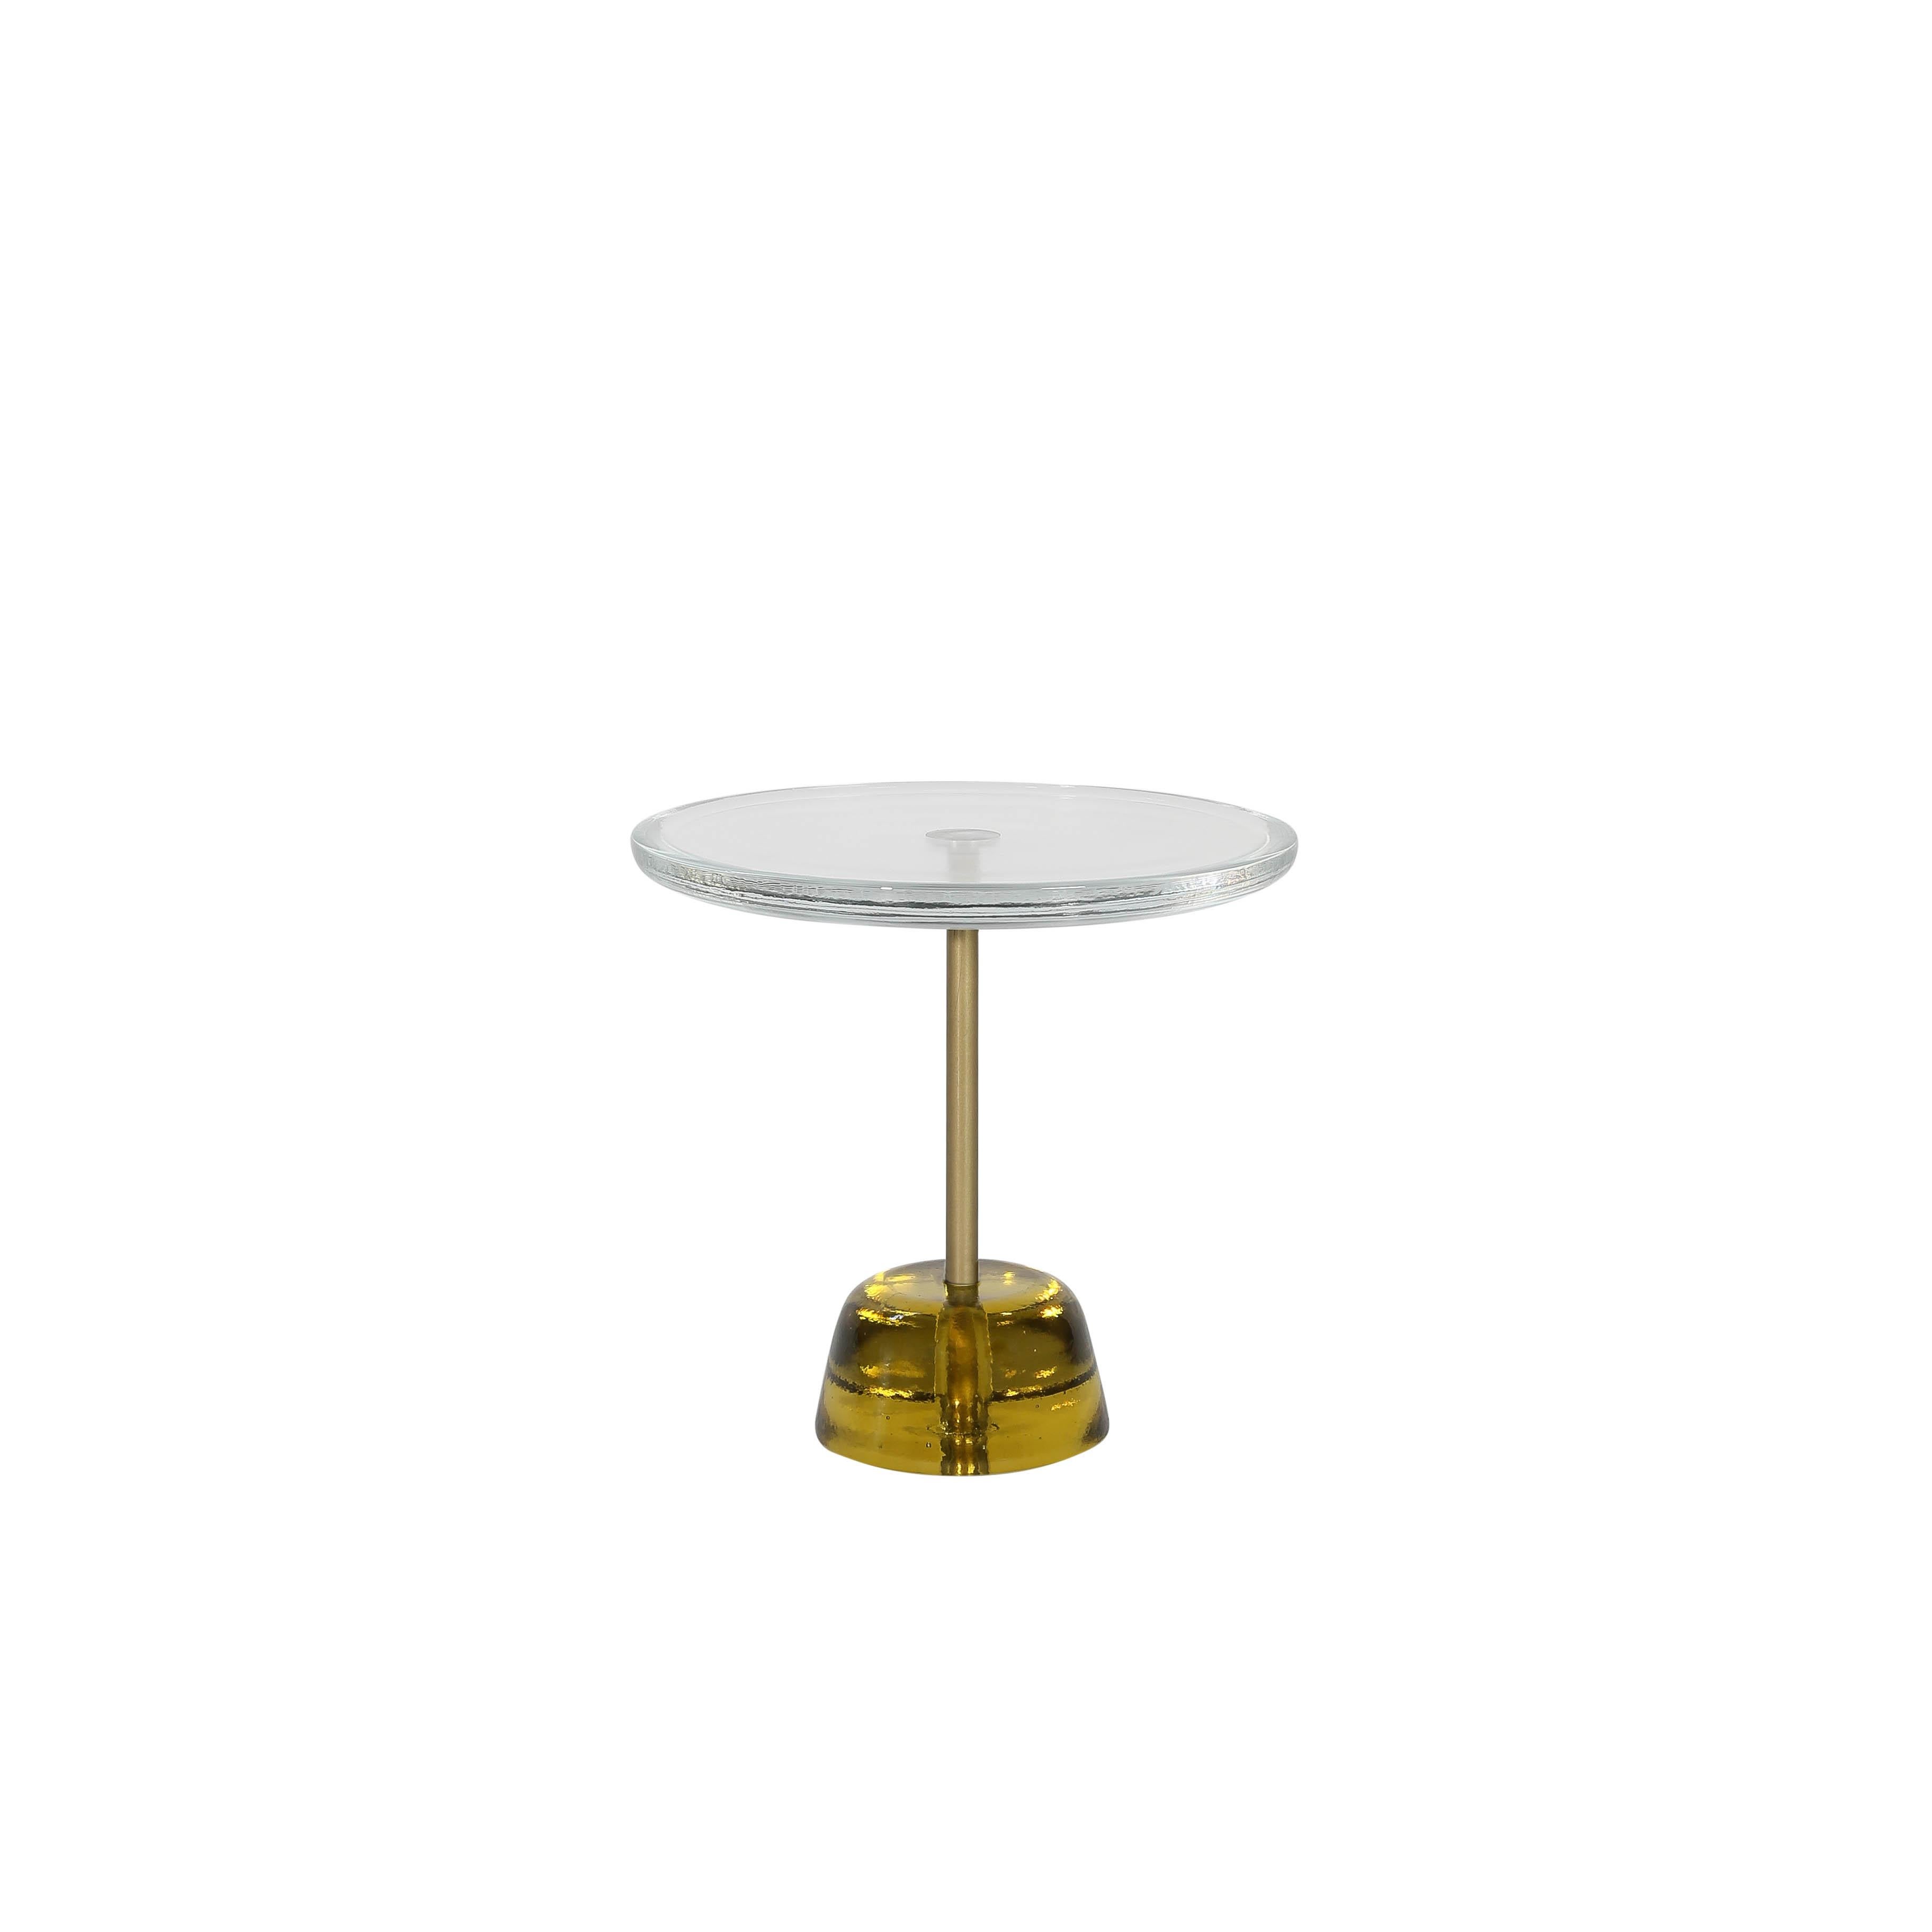 Pina low transparent brass side table by Pulpo
Dimensions: D 44 x H 42 cm
Materials: Glass; brass and steel.

Also available in different colours.

Sebastian Herkner’s distinctively tall, skinny side table series pina is inspired by the